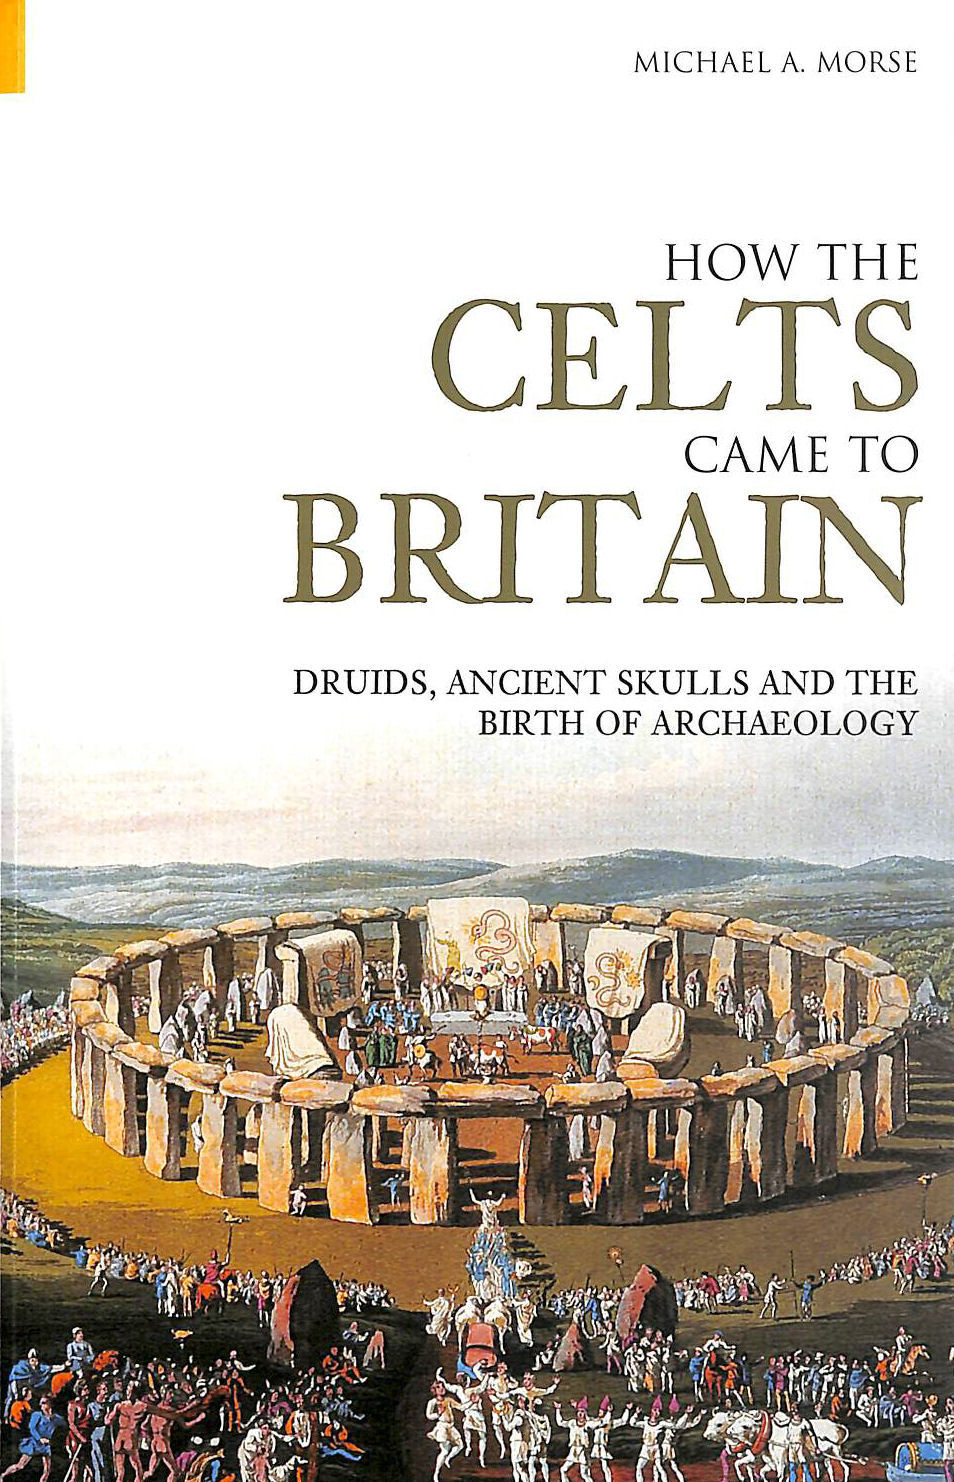 MICHAEL A MORSE - How the Celts Came to Britain: Druids, Ancient Skulls and the Birth of Archaeology